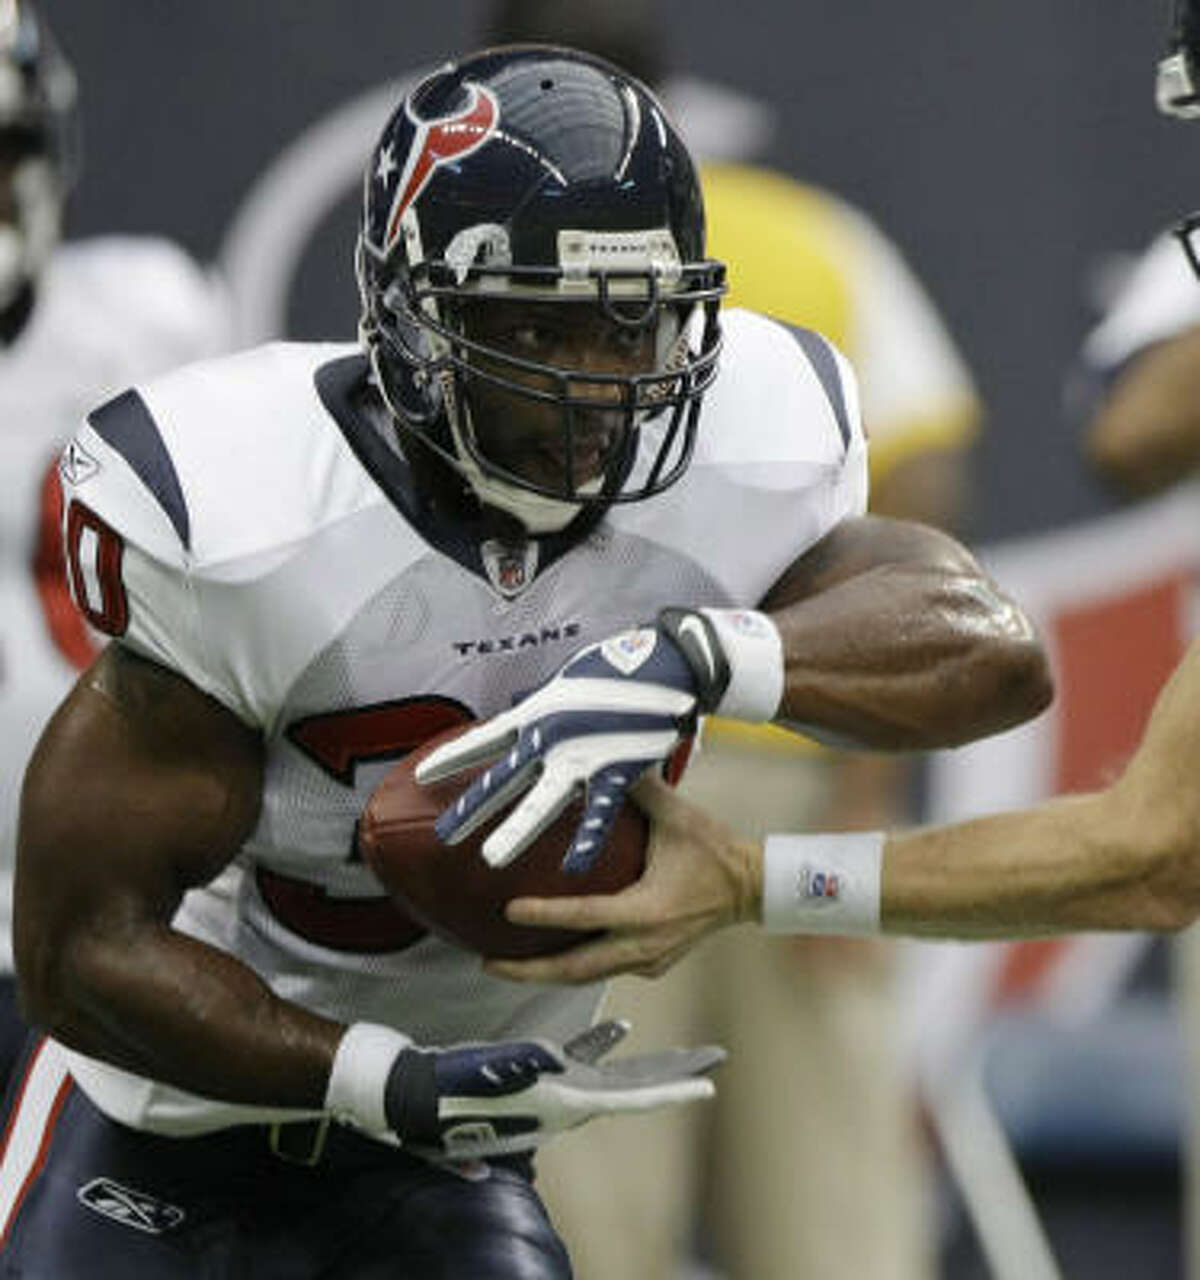 Texans running back Ahman Green, who was injured on the Texans’ first play after catching a 5-yard pass, should miss the second preseason game at New Orleans and return for the trip to Dallas.